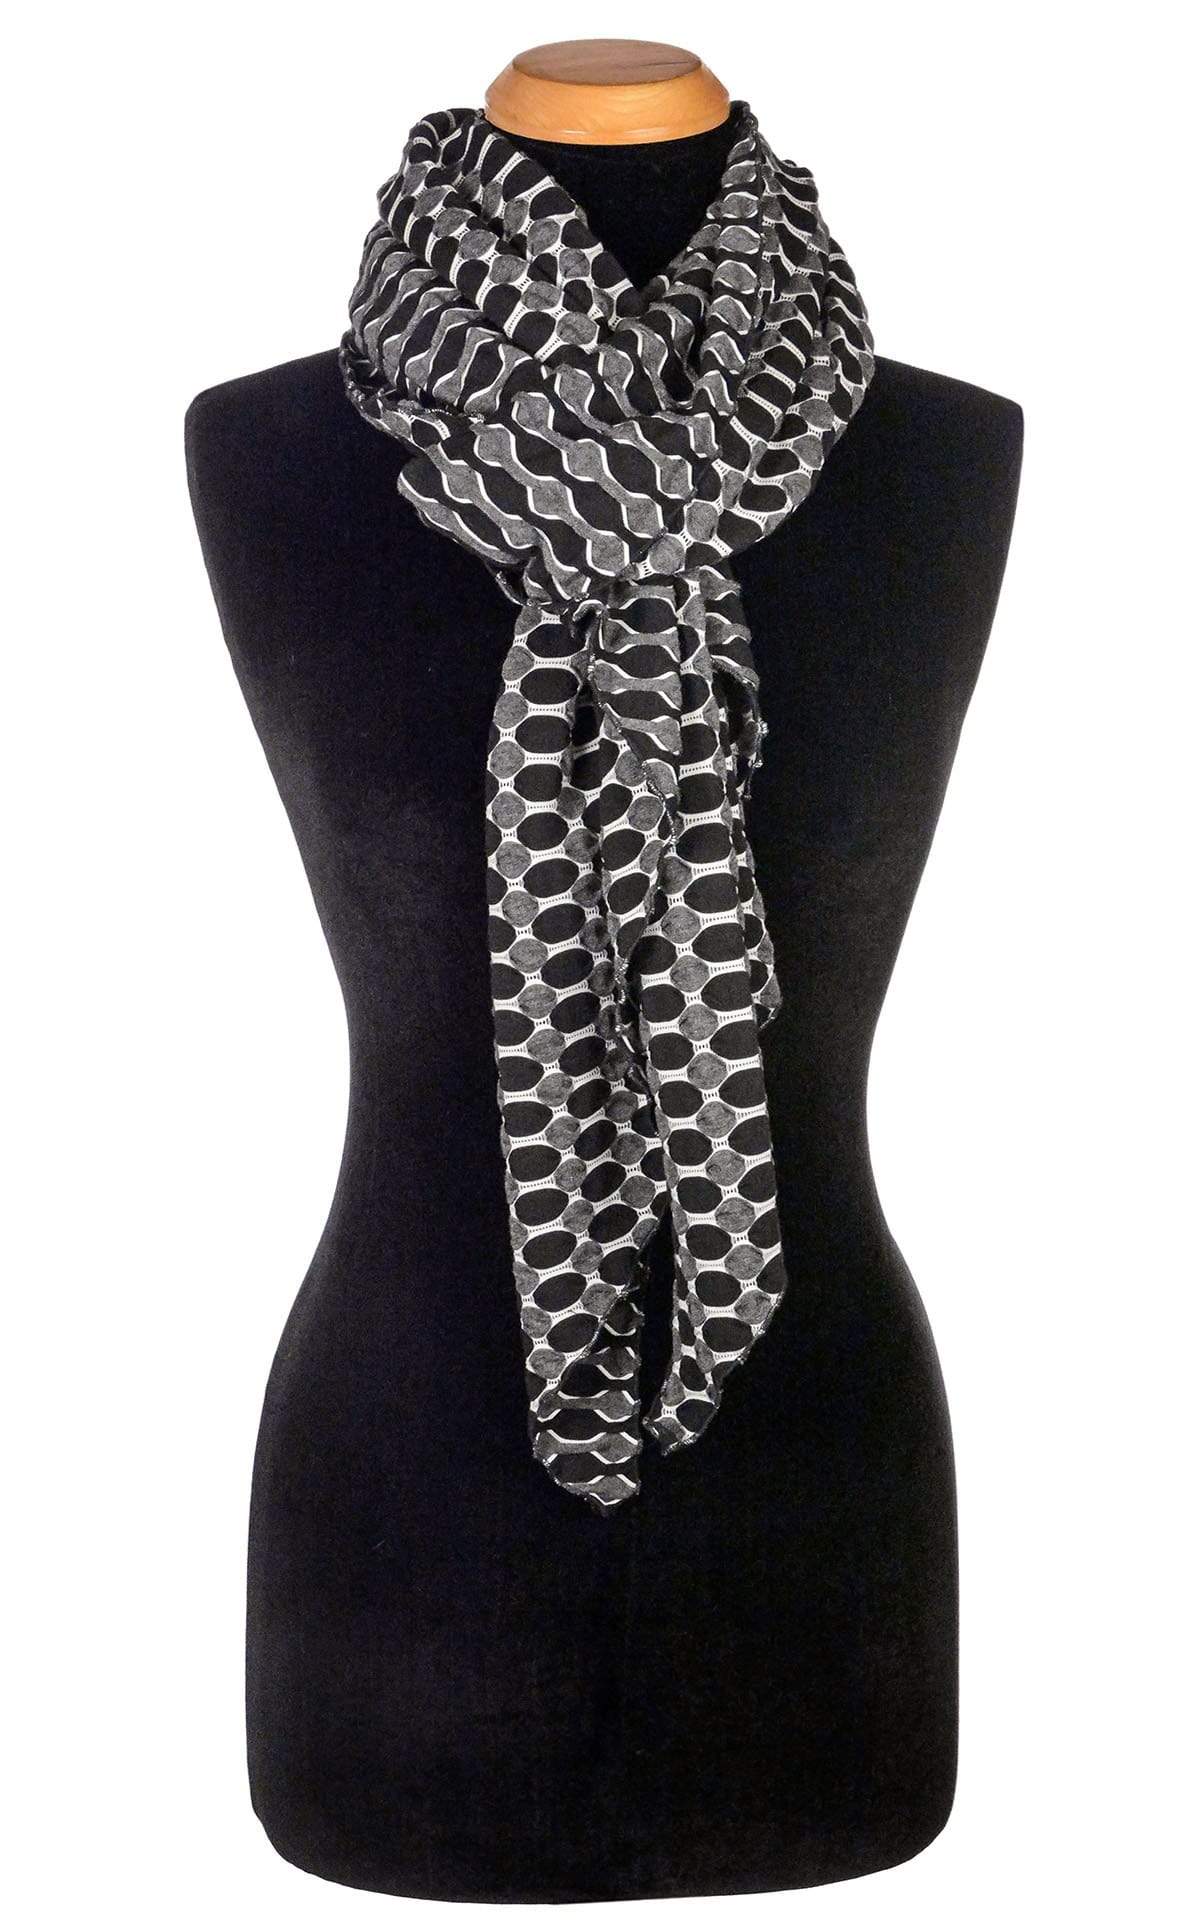 Women’s  Large Handkerchief Scarf, Wrap on Mannequin shown tied | Lunar and Solar Eclipse, black knit with white lattice patterning exposing sections of gray and white| Handmade in Seattle WA | Pandemonium Millinery